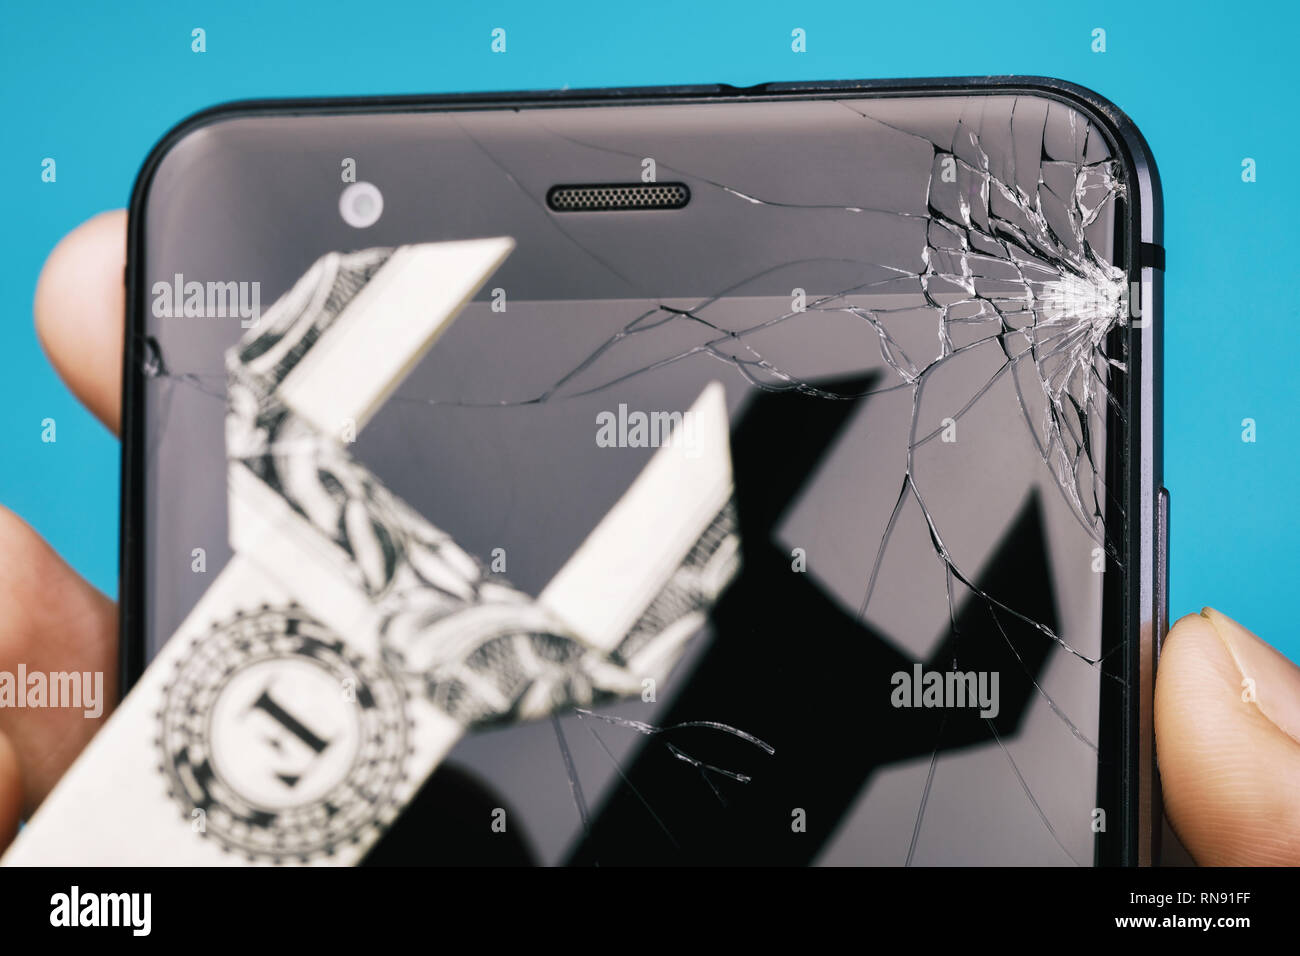 Broken screen of the phone in hand and dollar in the form of a key, as a concept on cost of repairing a mobile device, close-up Stock Photo